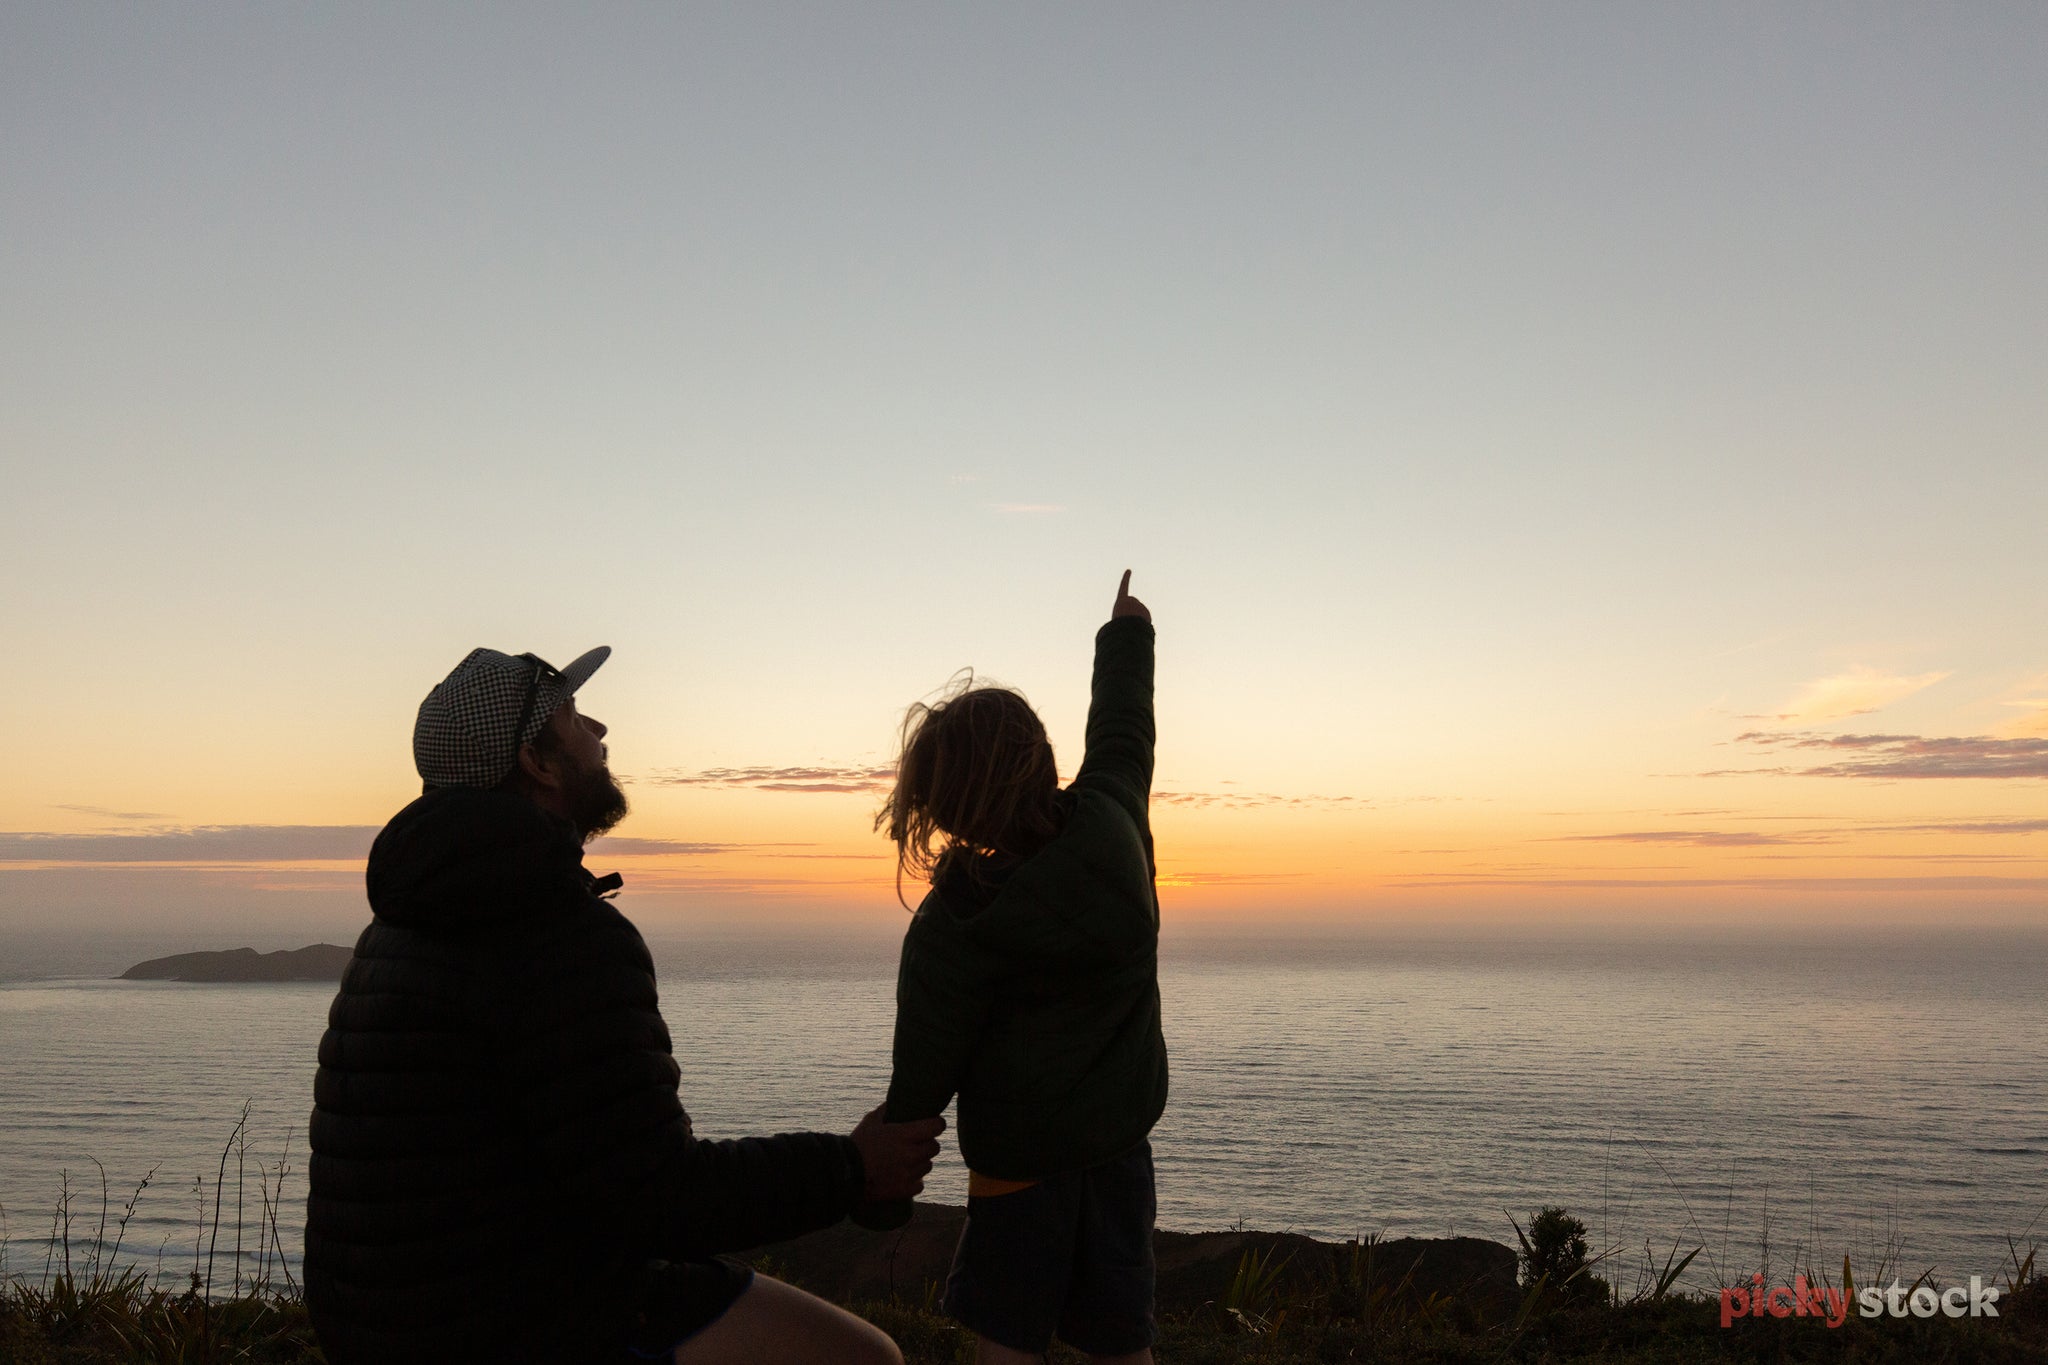 Silhouette of dad in puffer jacket holding hands of young daughter as they look out from a cliff towards the ocean as the sun sets. The dad kneels down to her level, and she points up to the sky, spotting something. 